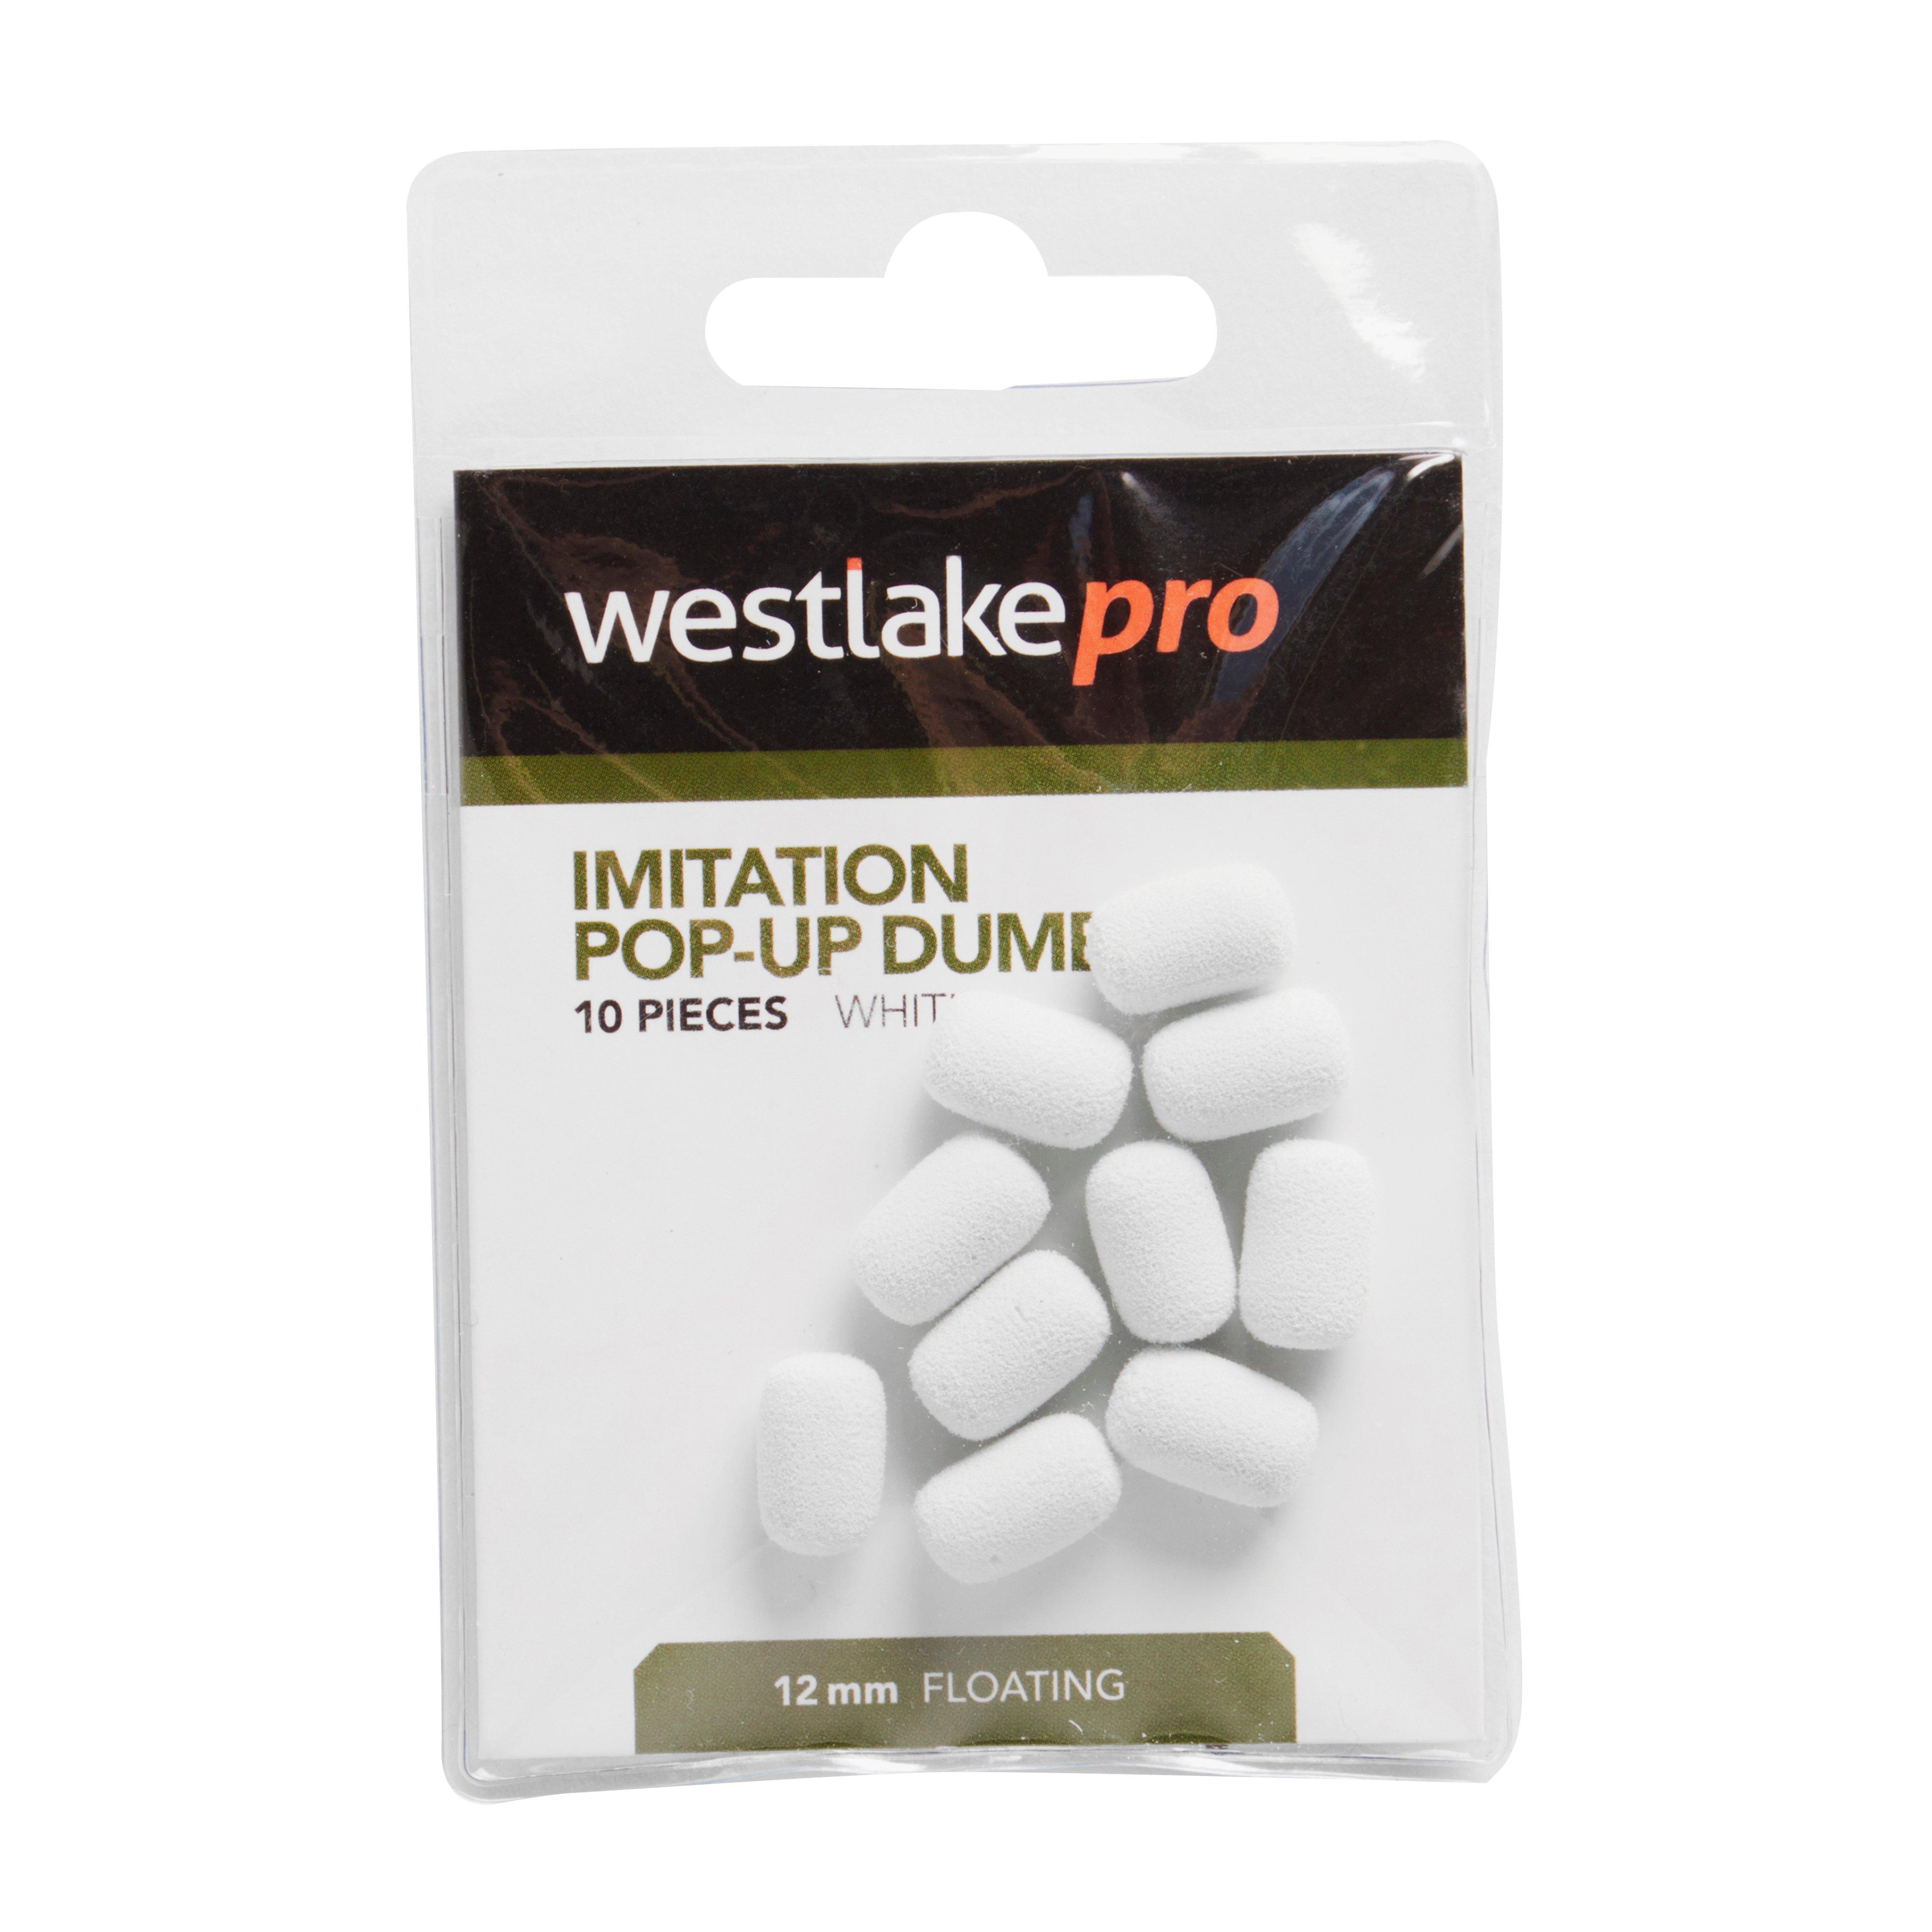 Westlake Popup Dumbell 12Mm White 10Pcs Review